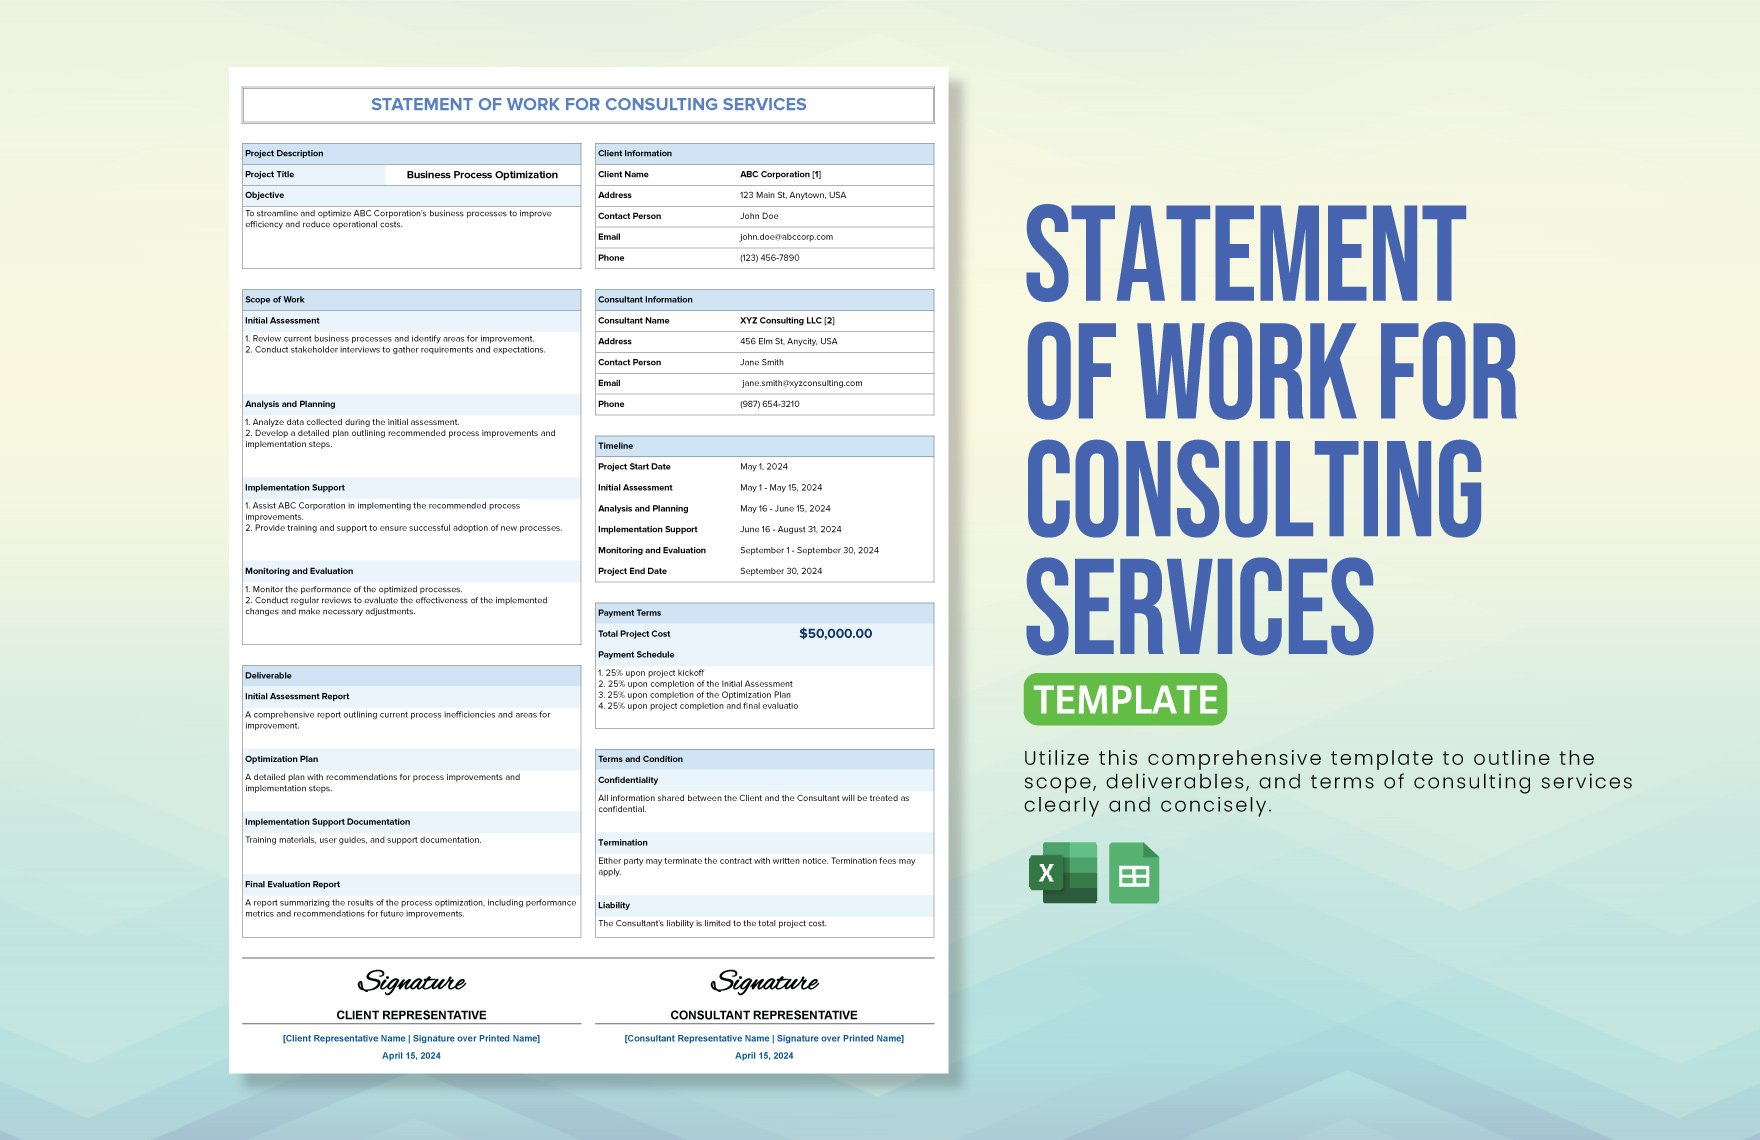 Statement of Work For Consulting Services Template in Excel, Google Sheets